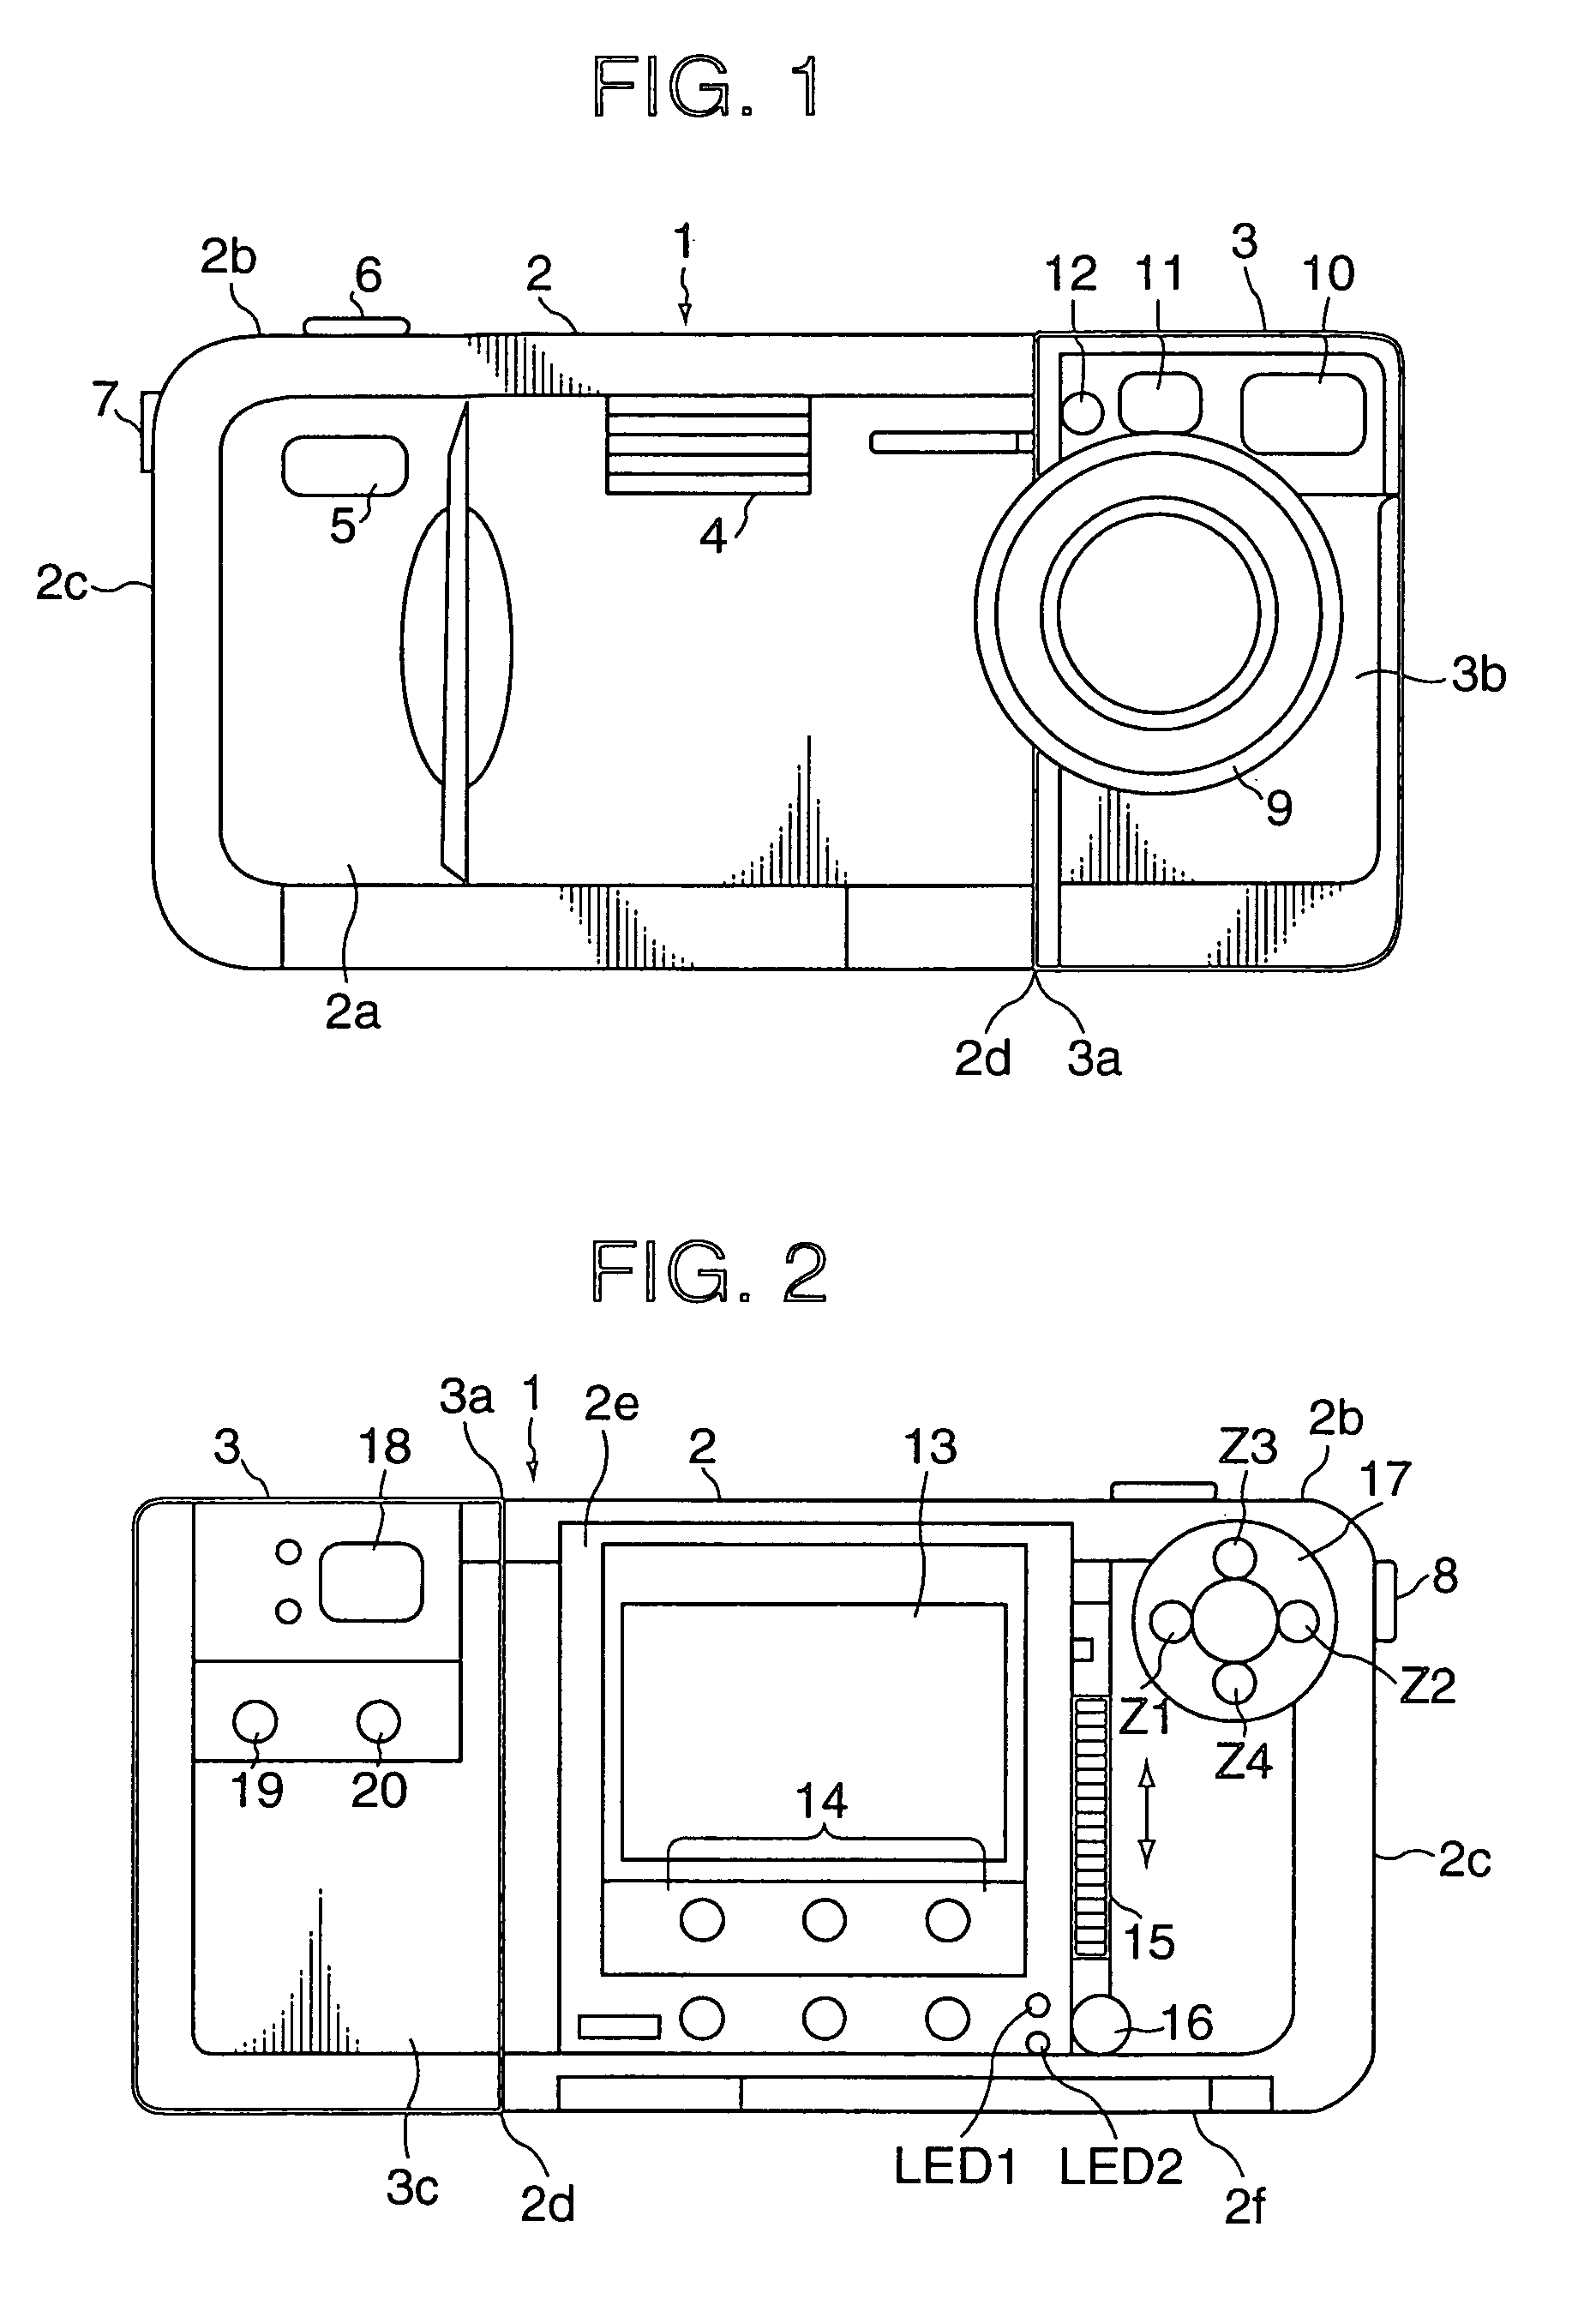 Image pickup apparatus including selective insertion of ND filter into taking lens optical path based on luminance of object to be imaged